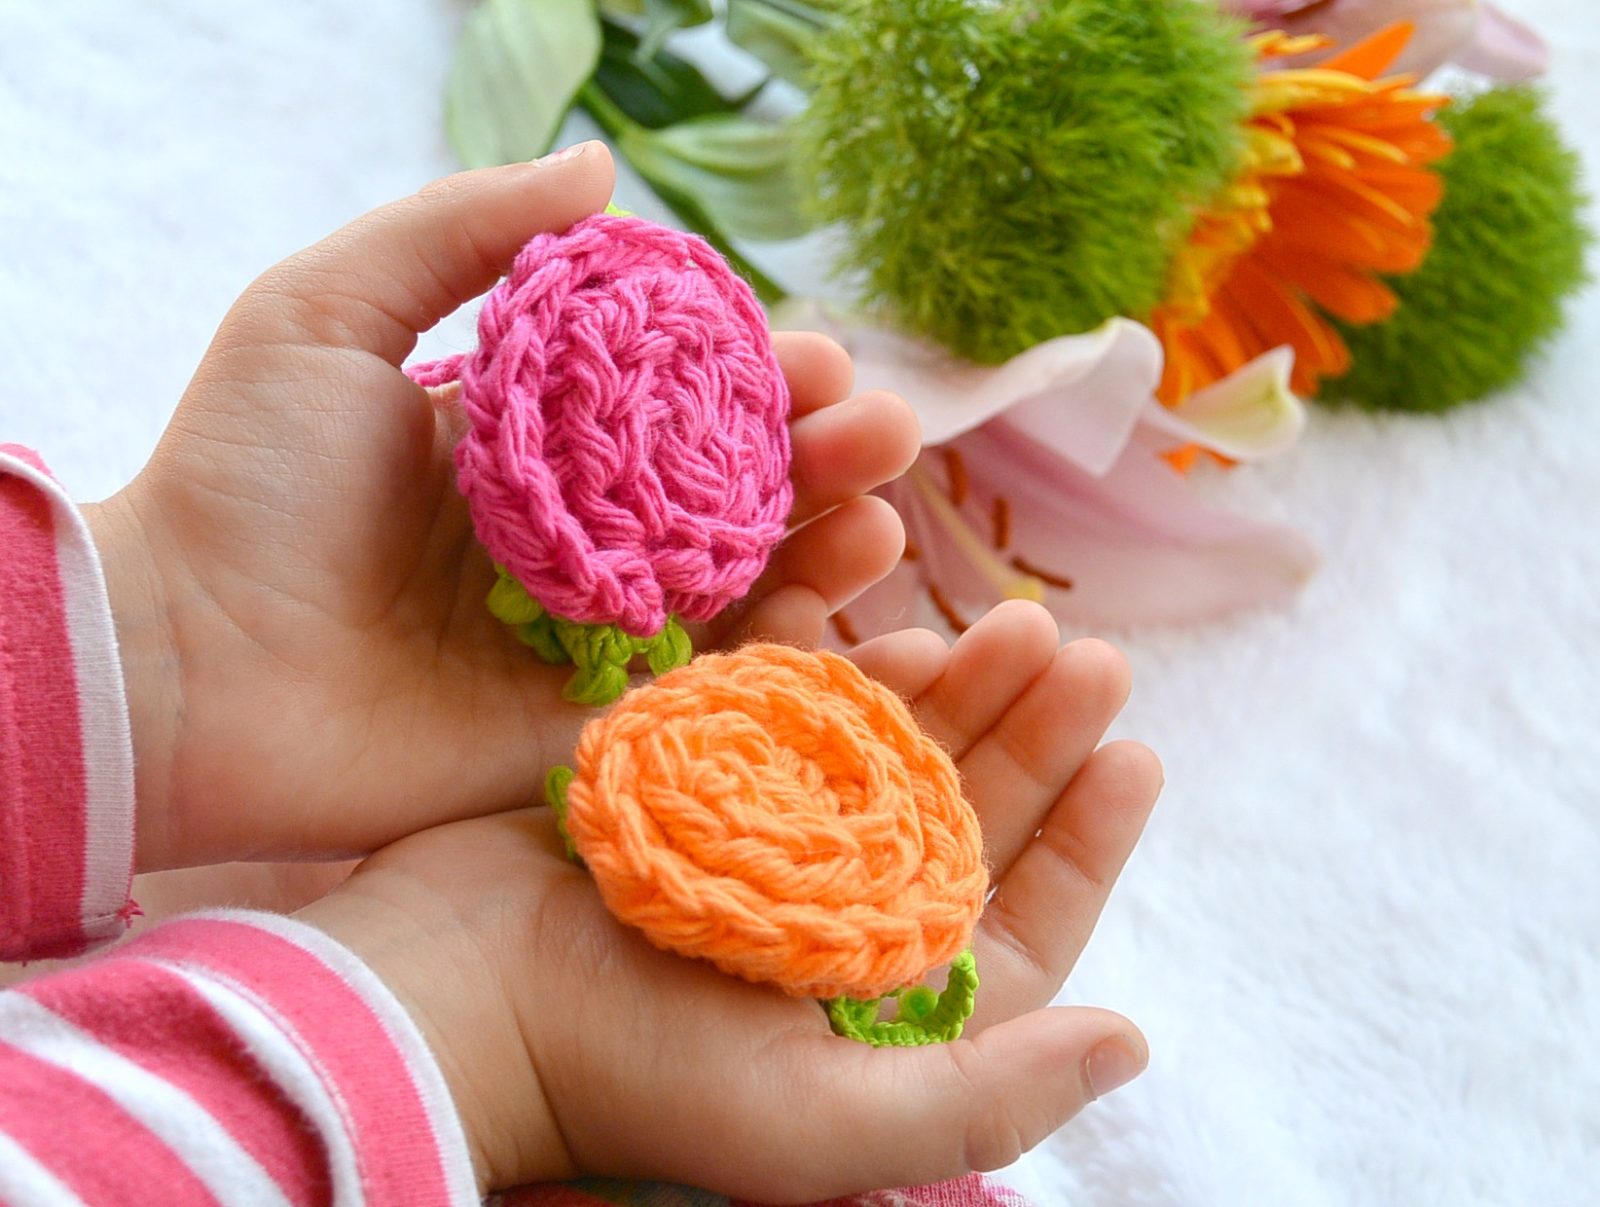 Little Crochet Deco Roses – Mama In A Stitch